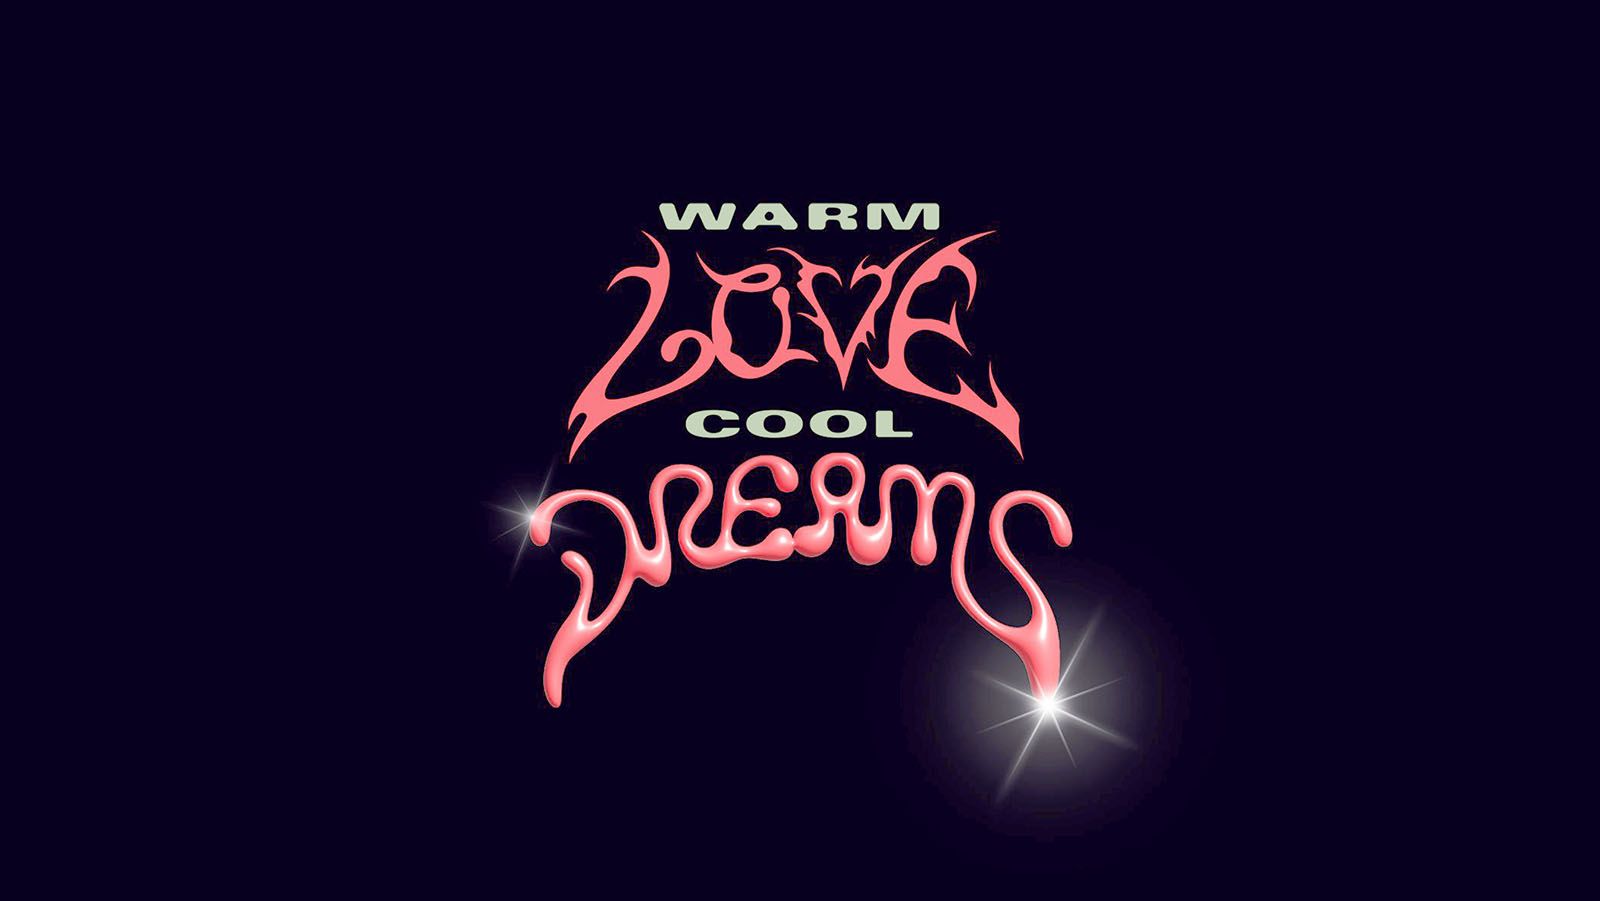 The Warm Love Cool Dreams festival will be Sept. 28-29 at The Salt Shed in Chicago.